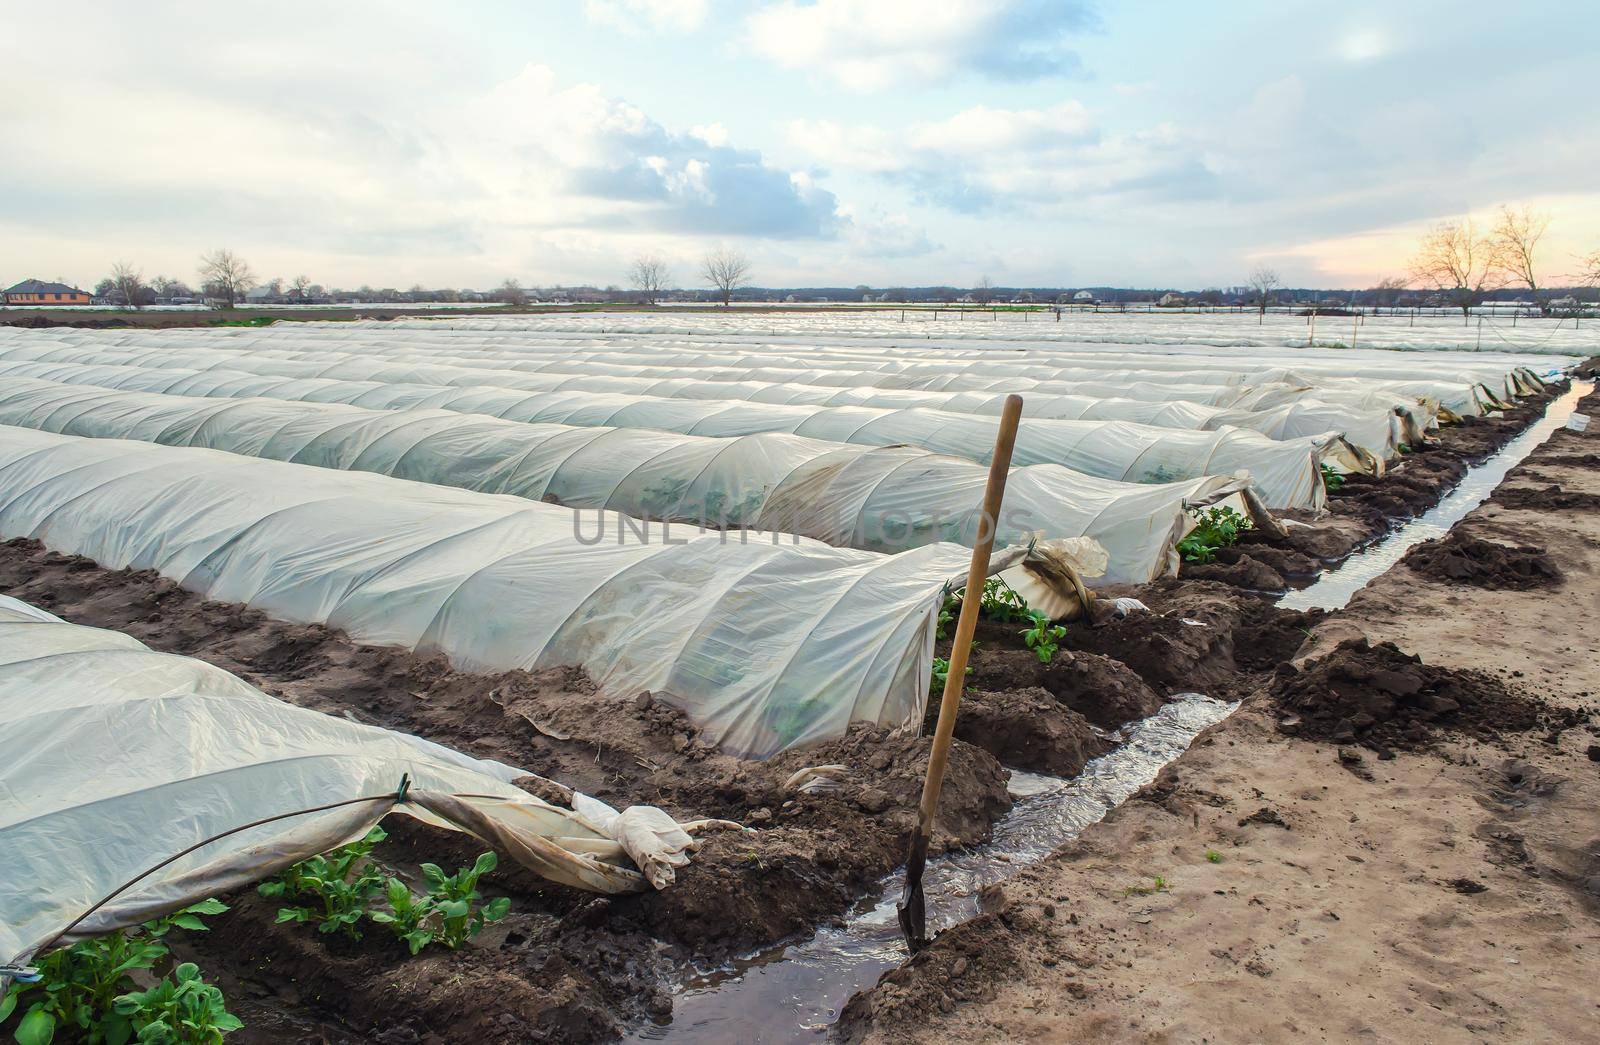 Open tunnel rows of potato bushes plantation and an irrigation canal filled with water. Agroindustry and agriculture. Growing early potatoes under protective plastic cover. Greenhouse effect.